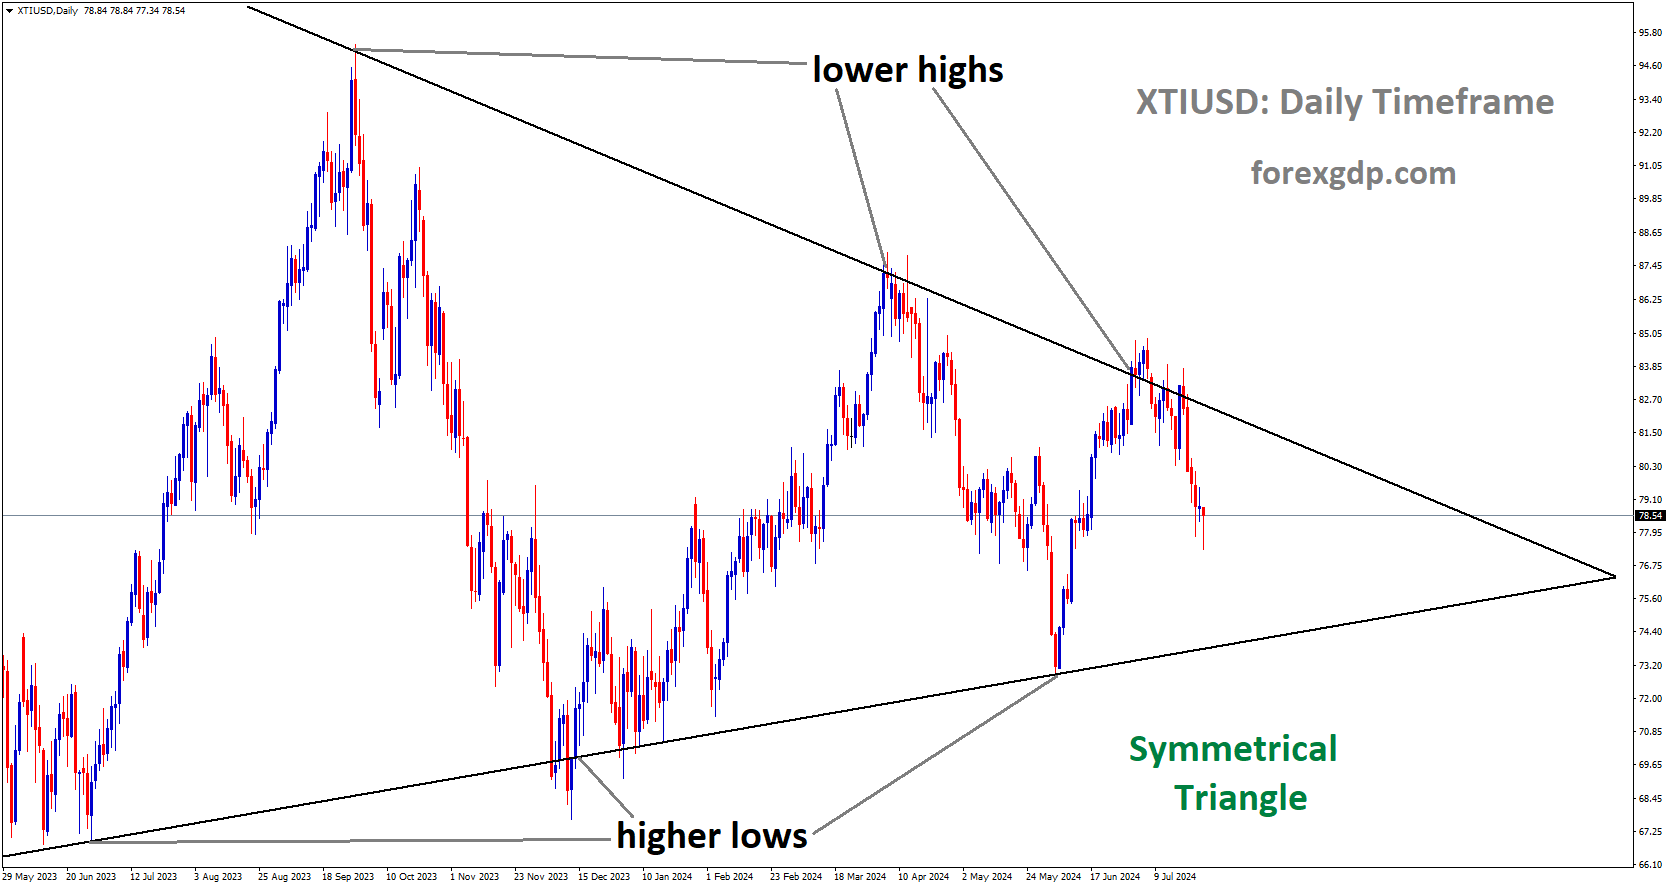 XTIUSD is moving in Symmetrical Triangle and market has fallen from lower high area of the pattern